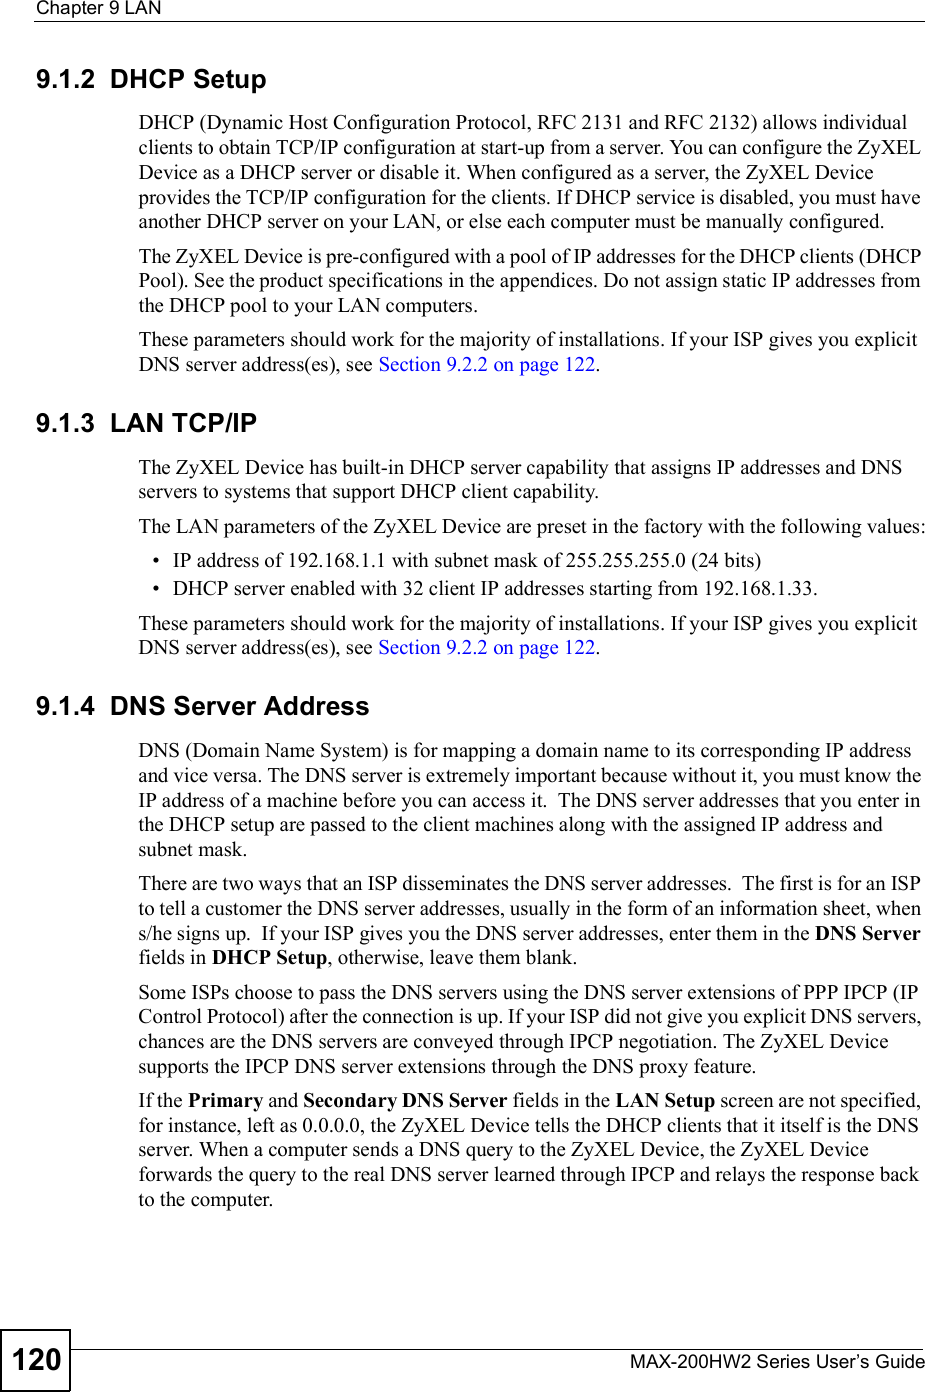 Chapter 9LANMAX-200HW2 Series User s Guide1209.1.2  DHCP SetupDHCP (Dynamic Host Configuration Protocol, RFC 2131 and RFC 2132) allows individual clients to obtain TCP/IP configuration at start-up from a server. You can configure the ZyXEL Device as a DHCP server or disable it. When configured as a server, the ZyXEL Device provides the TCP/IP configuration for the clients. If DHCP service is disabled, you must have another DHCP server on your LAN, or else each computer must be manually configured.The ZyXEL Device is pre-configured with a pool of IP addresses for the DHCP clients (DHCP Pool). See the product specifications in the appendices. Do not assign static IP addresses from the DHCP pool to your LAN computers.These parameters should work for the majority of installations. If your ISP gives you explicit DNS server address(es), see Section 9.2.2 on page 122.9.1.3  LAN TCP/IPThe ZyXEL Device has built-in DHCP server capability that assigns IP addresses and DNS servers to systems that support DHCP client capability.The LAN parameters of the ZyXEL Device are preset in the factory with the following values: IP address of 192.168.1.1 with subnet mask of 255.255.255.0 (24 bits) DHCP server enabled with 32 client IP addresses starting from 192.168.1.33. These parameters should work for the majority of installations. If your ISP gives you explicit DNS server address(es), see Section 9.2.2 on page 122.9.1.4  DNS Server AddressDNS (Domain Name System) is for mapping a domain name to its corresponding IP address and vice versa. The DNS server is extremely important because without it, you must know the IP address of a machine before you can access it.  The DNS server addresses that you enter in the DHCP setup are passed to the client machines along with the assigned IP address and subnet mask.There are two ways that an ISP disseminates the DNS server addresses.  The first is for an ISP to tell a customer the DNS server addresses, usually in the form of an information sheet, when s/he signs up.  If your ISP gives you the DNS server addresses, enter them in the DNS Serverfields in DHCP Setup, otherwise, leave them blank.Some ISPs choose to pass the DNS servers using the DNS server extensions of PPP IPCP (IP Control Protocol) after the connection is up. If your ISP did not give you explicit DNS servers, chances are the DNS servers are conveyed through IPCP negotiation. The ZyXEL Device supports the IPCP DNS server extensions through the DNS proxy feature.If the Primary and Secondary DNS Server fields in the LAN Setup screen are notspecified,for instance, left as 0.0.0.0, the ZyXEL Device tells the DHCP clients that it itself is the DNS server. When a computer sends a DNS query to the ZyXEL Device, the ZyXEL Device forwards the query to the real DNS server learned through IPCP and relays the response back to the computer.